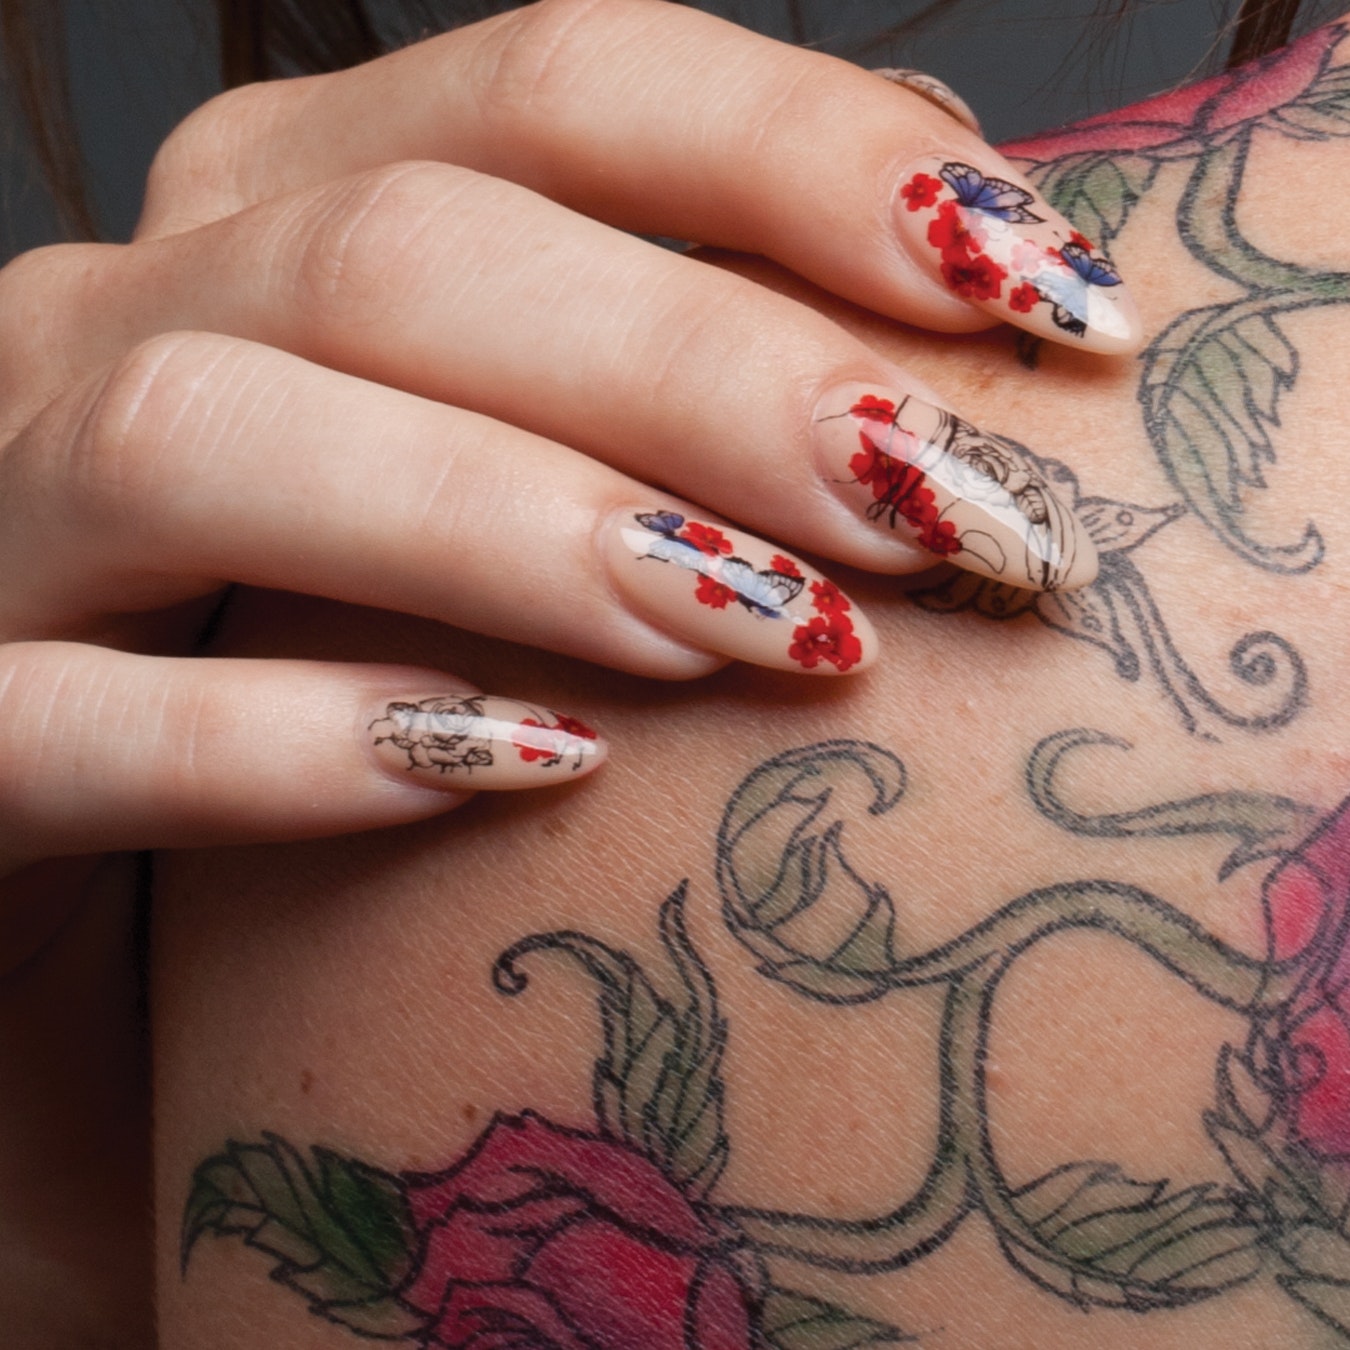 Nail Tattoo Meaning: Personal Stories and Symbolism Behind Body Art